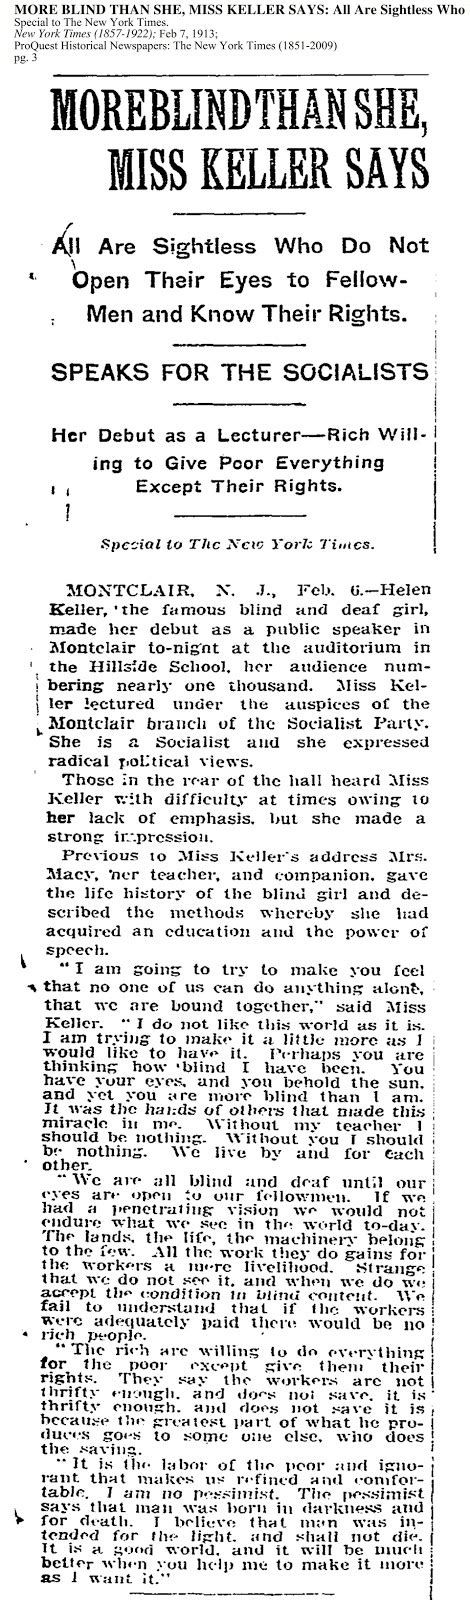 Helen Keller Article From New York Times 7 Feb 1913 Rich Criticised